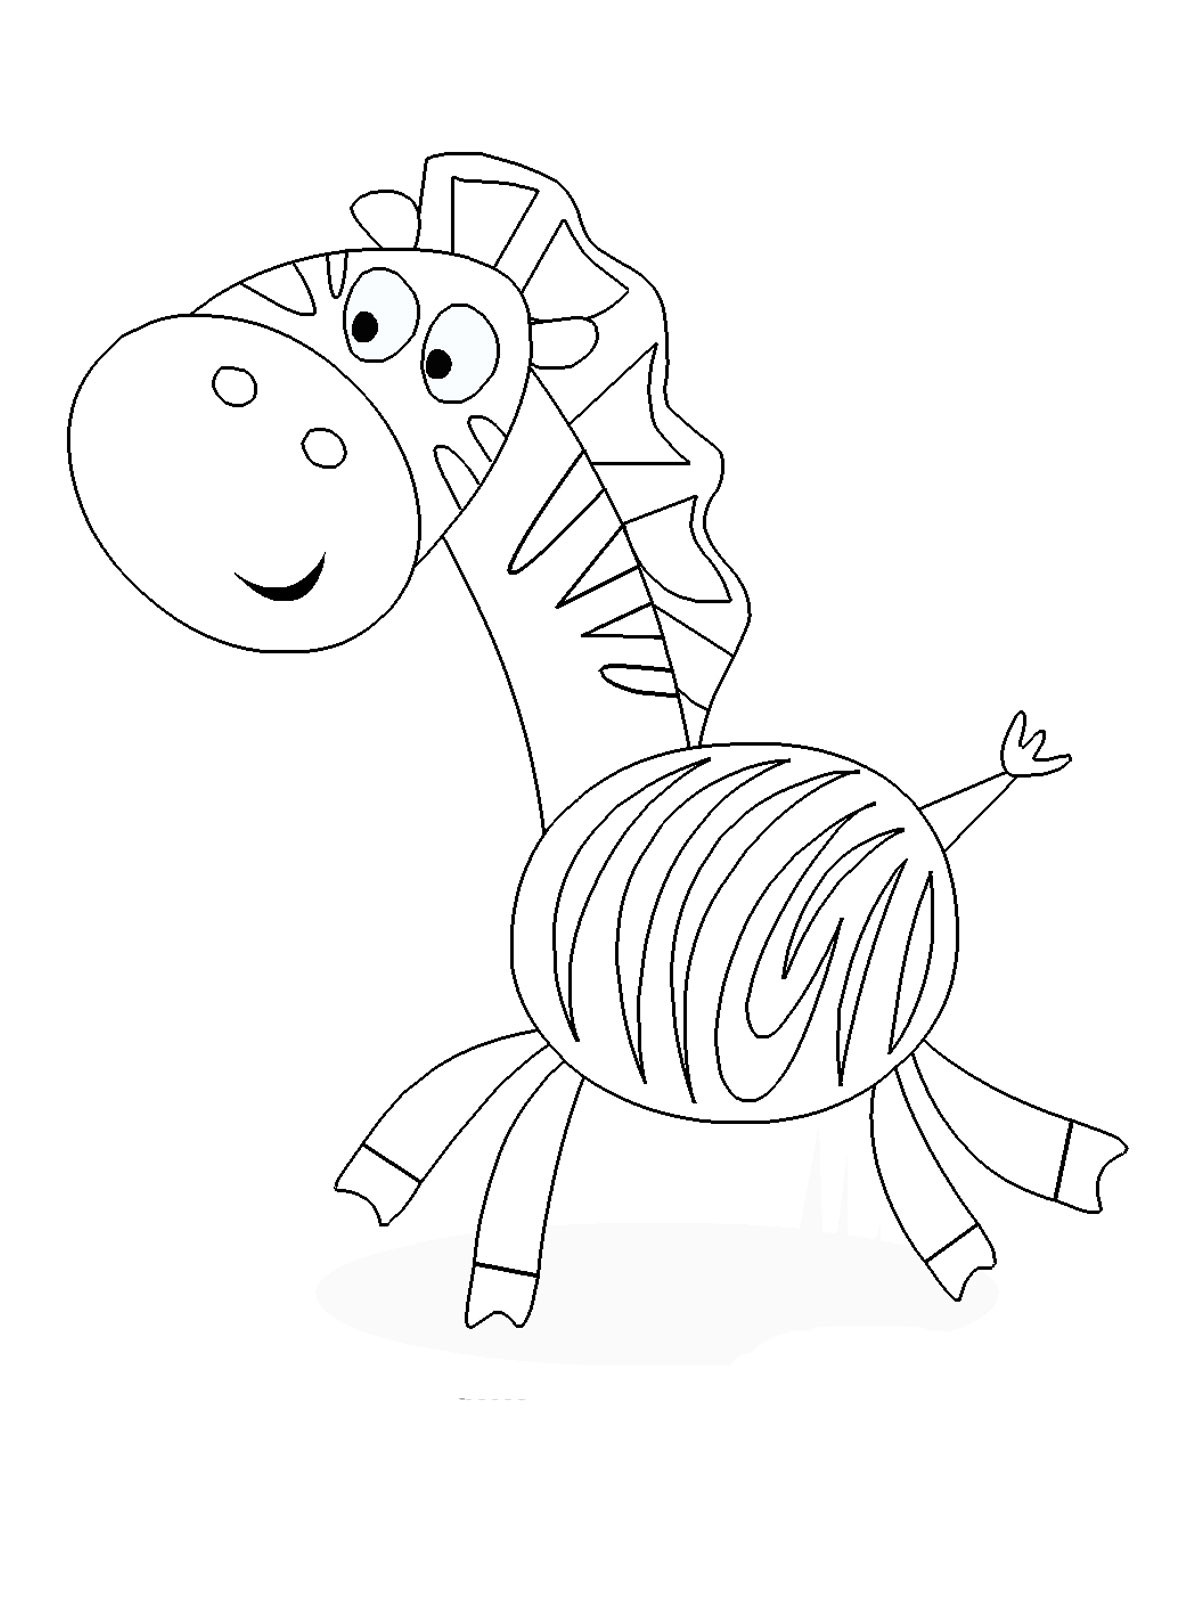 Free Online Coloring Pages For Kids
 Printable coloring pages for kids